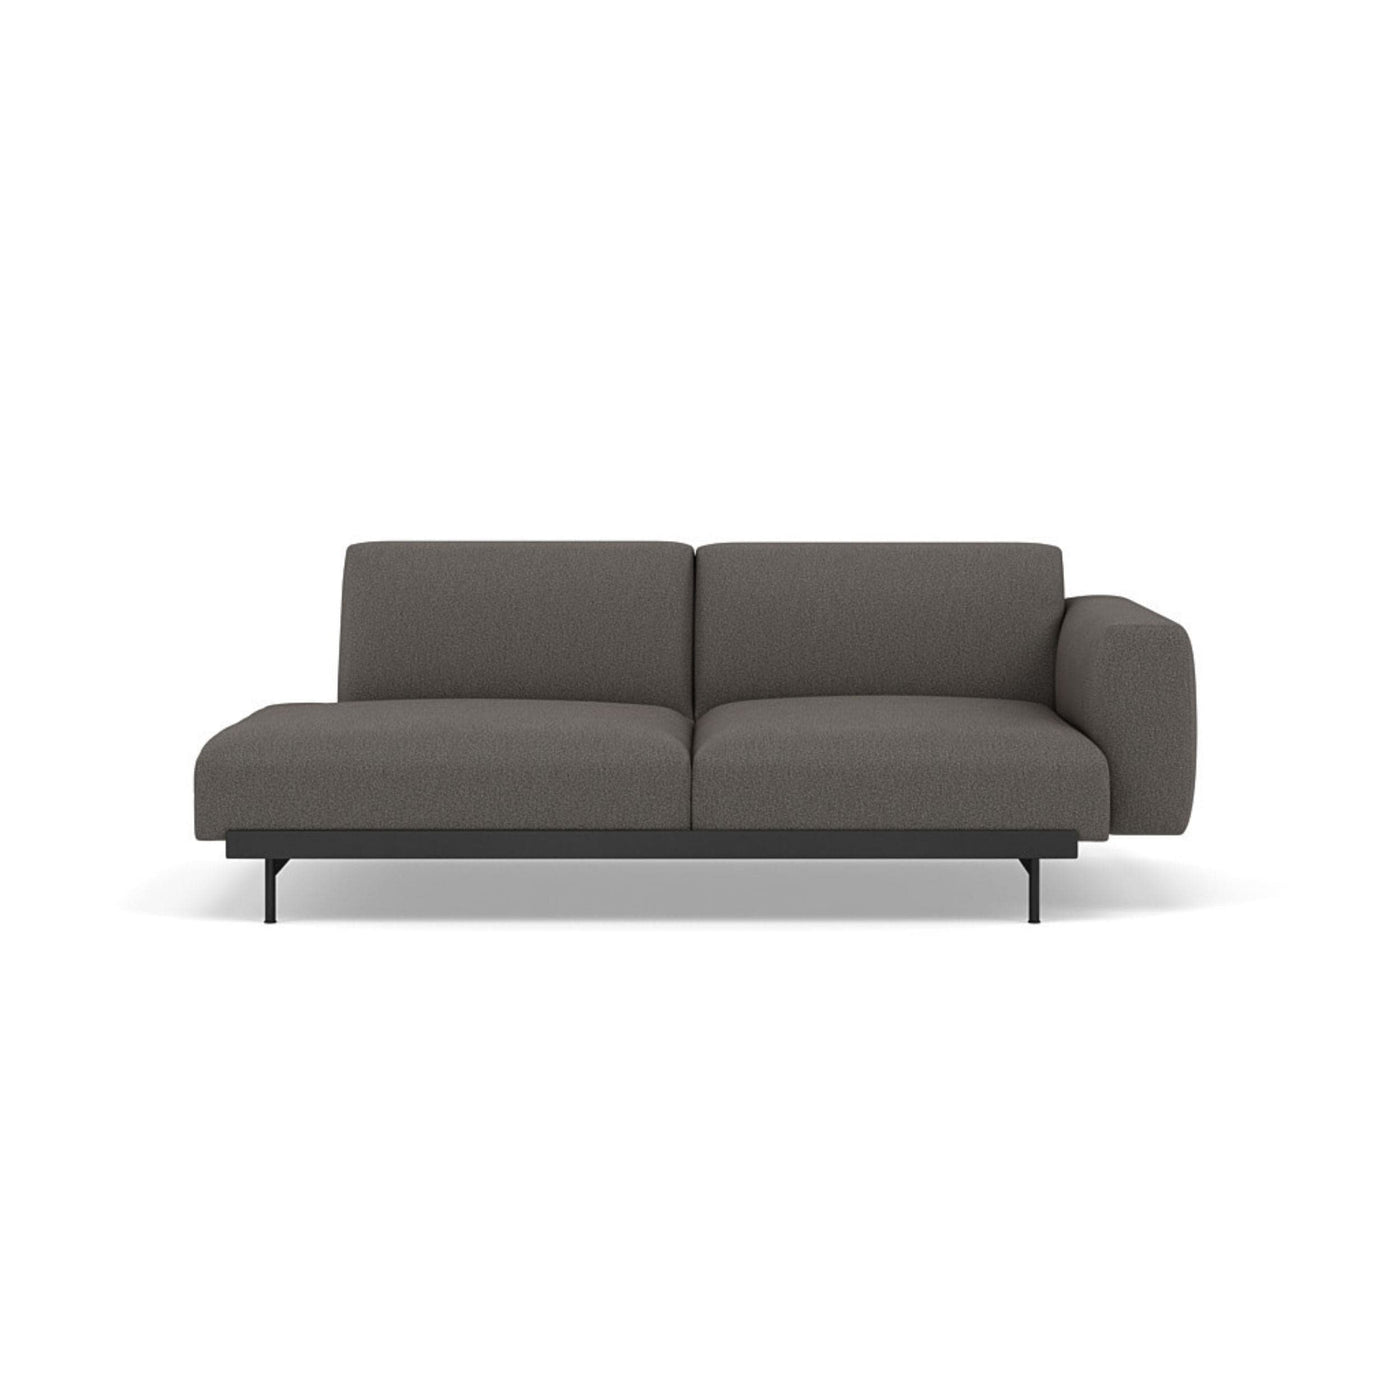 Muuto In Situ Modular 2 Seater Sofa, configuration 2 Made to order from someday designs #colour_clay-9